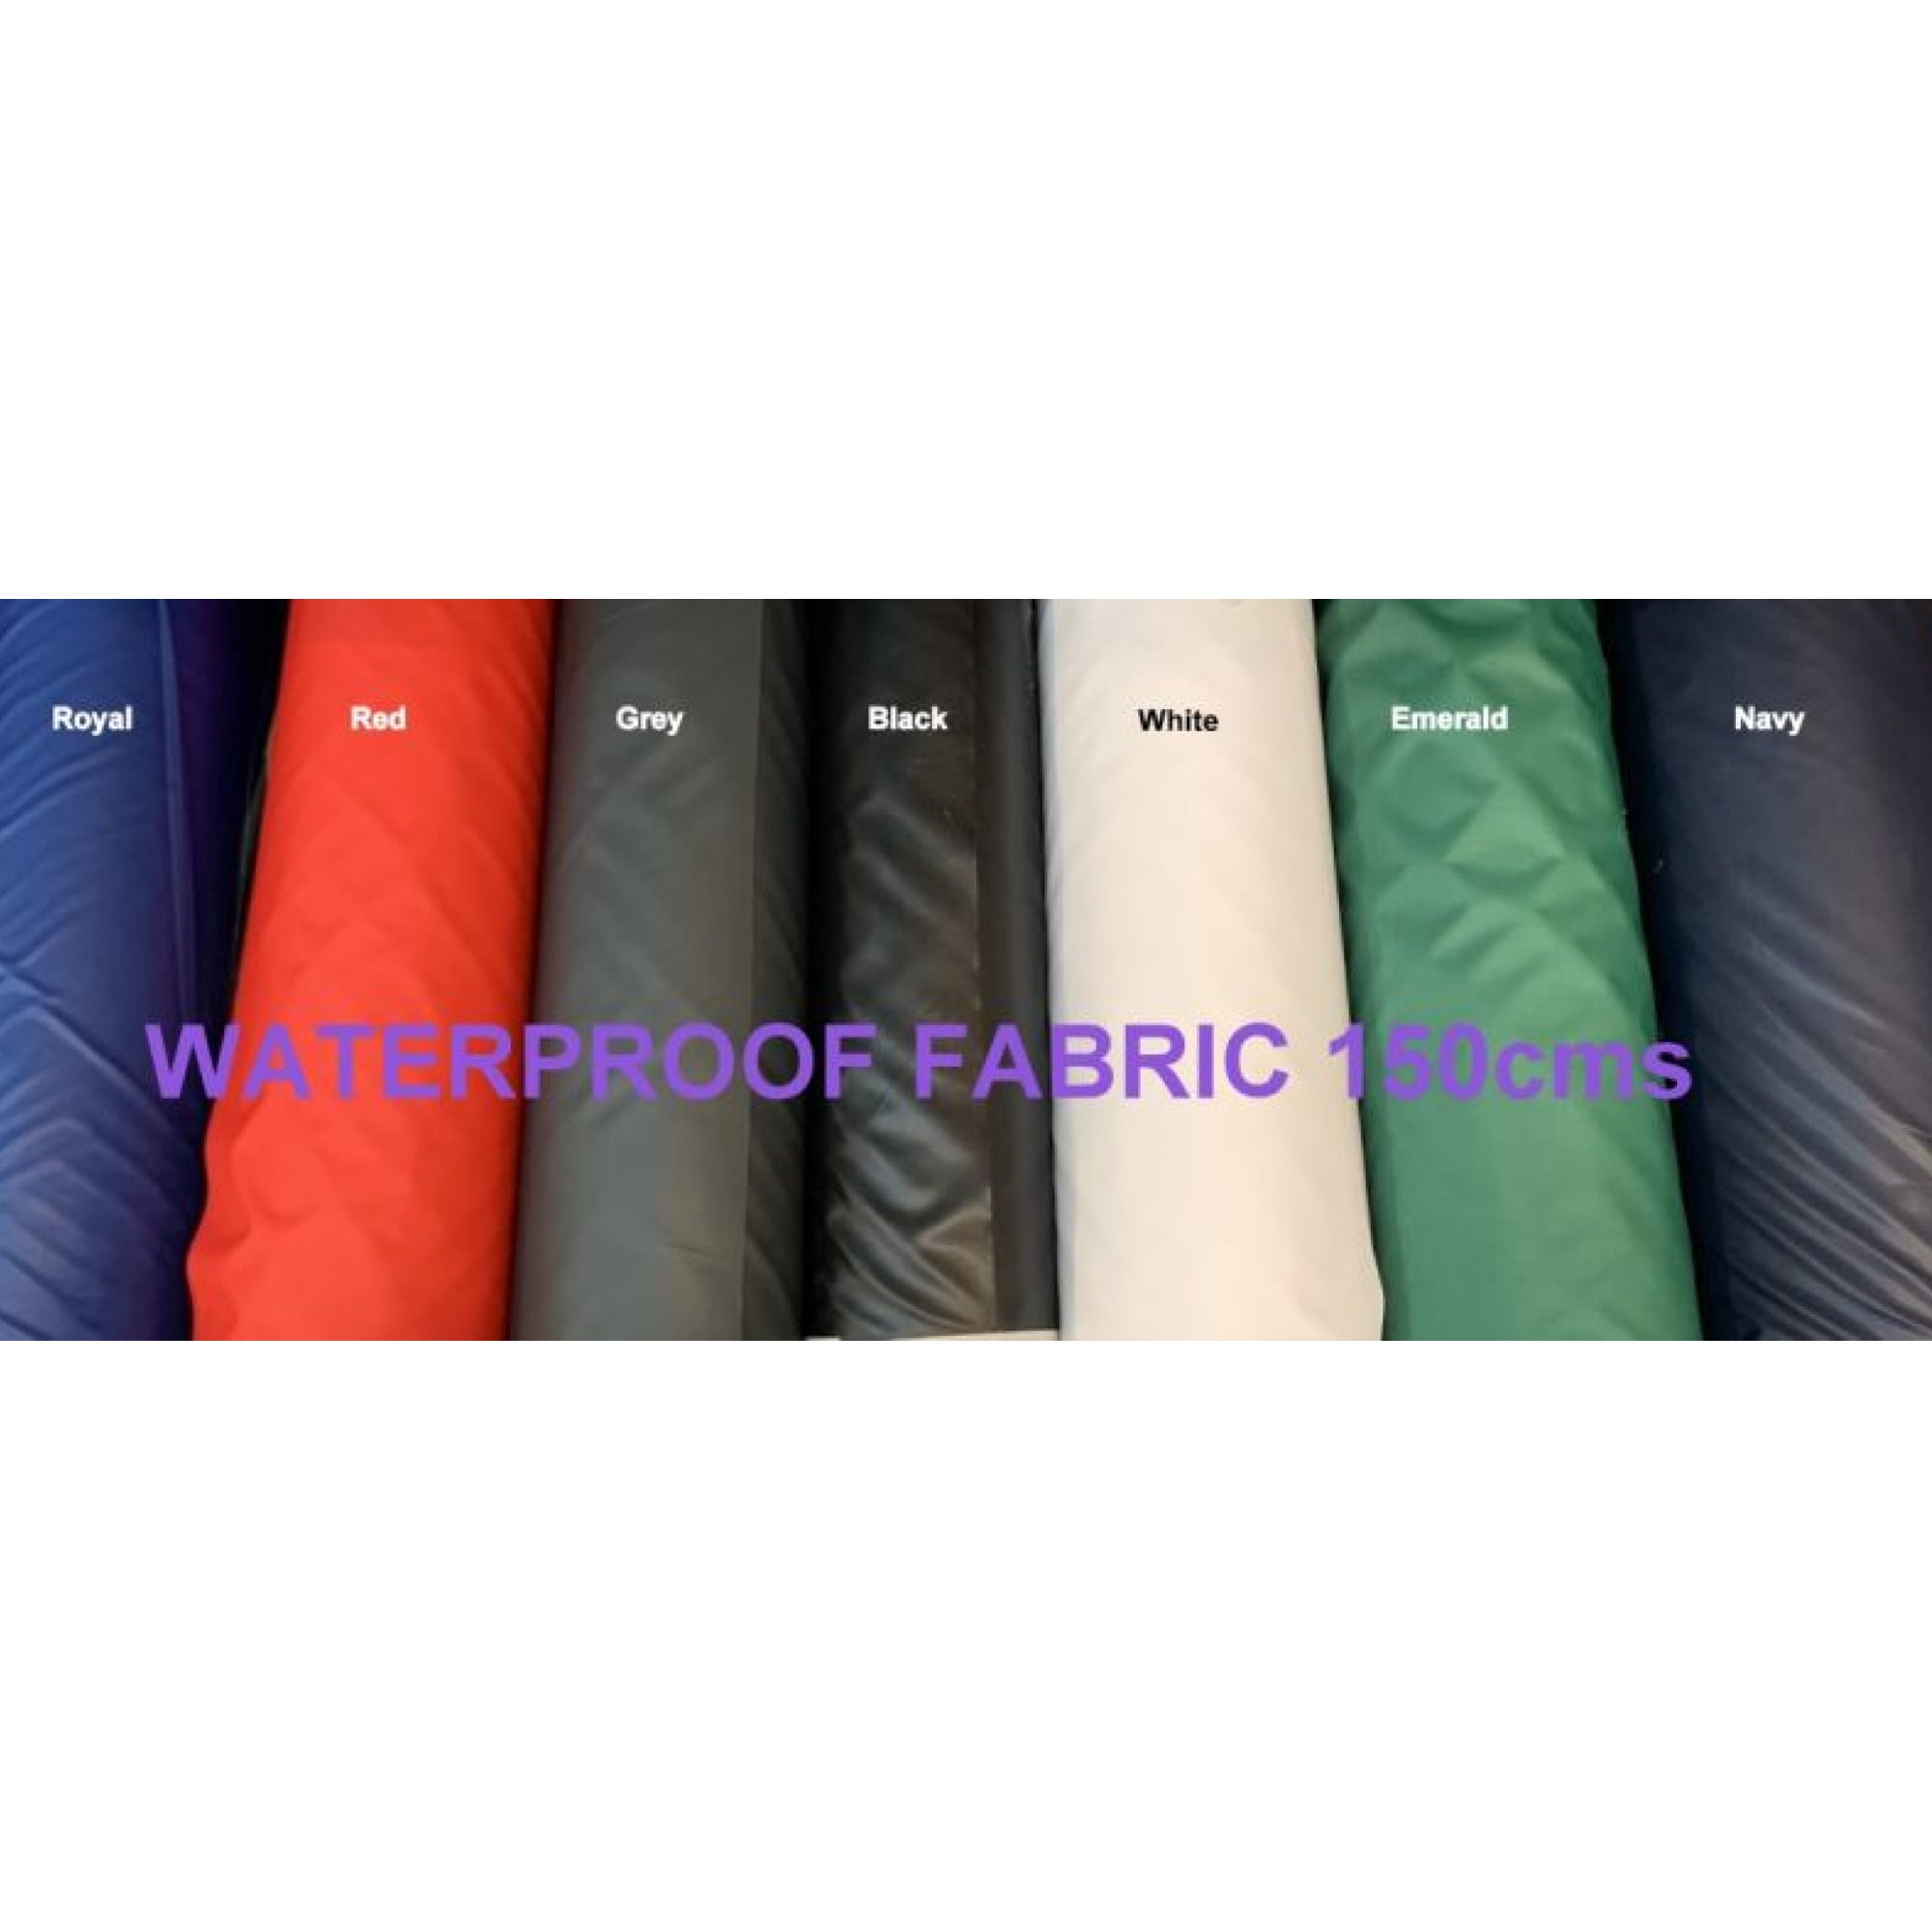 Pu Coated Fabric Waterproof 100% Polyester Fabric Cordura Fabric High  Tenacity Fabric For Outdoor Gear And Backpack - Explore China Wholesale  Coated Fabric and Polyester Fabric, Waterproof Fabric, Backpack Fabric